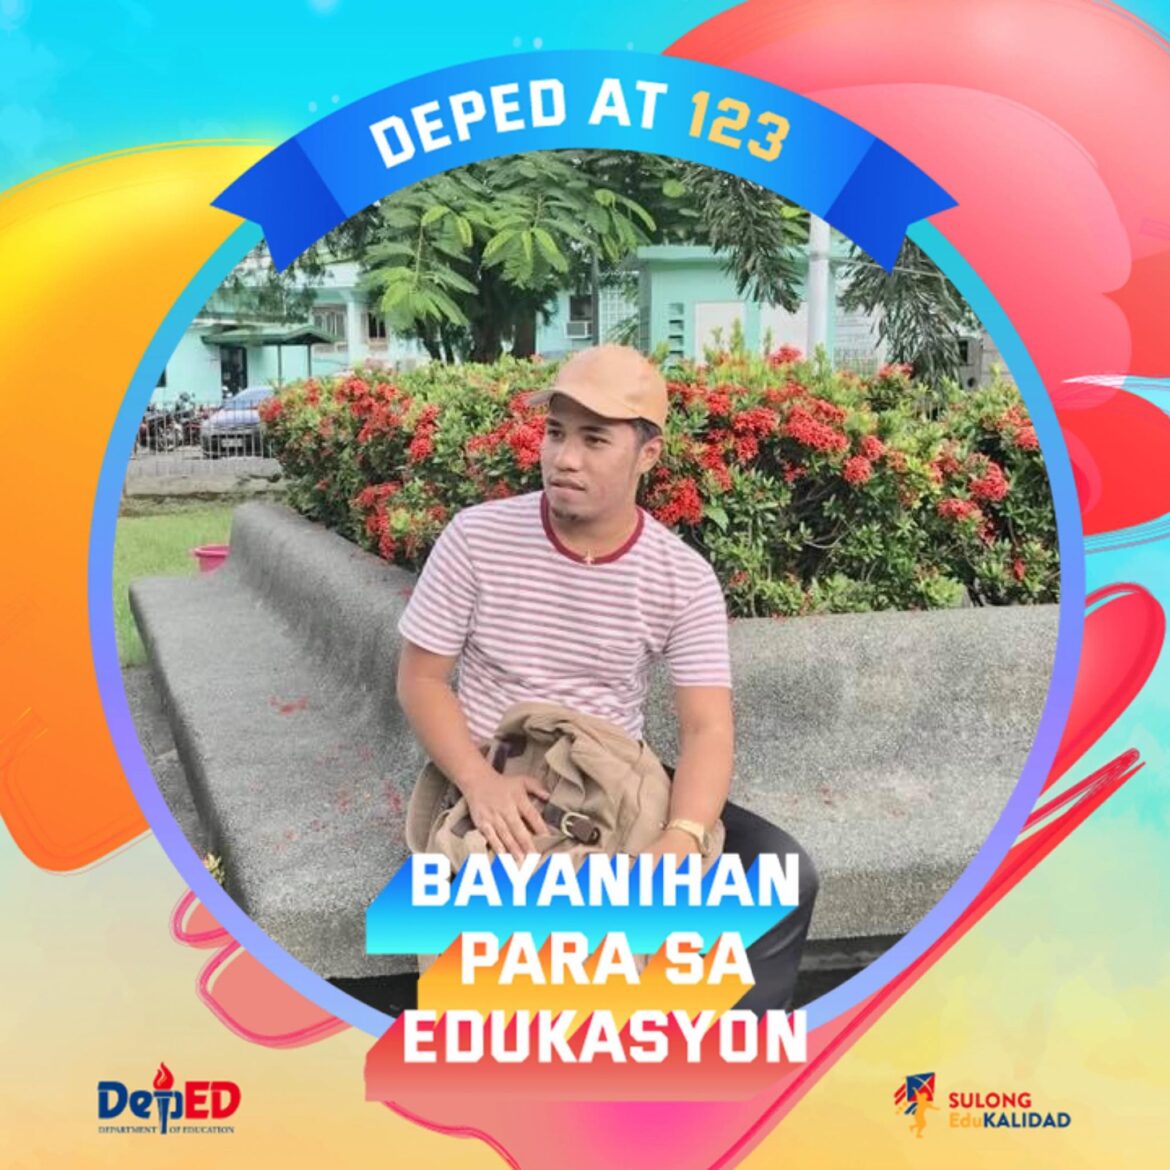 What’s Your DepEd Story?